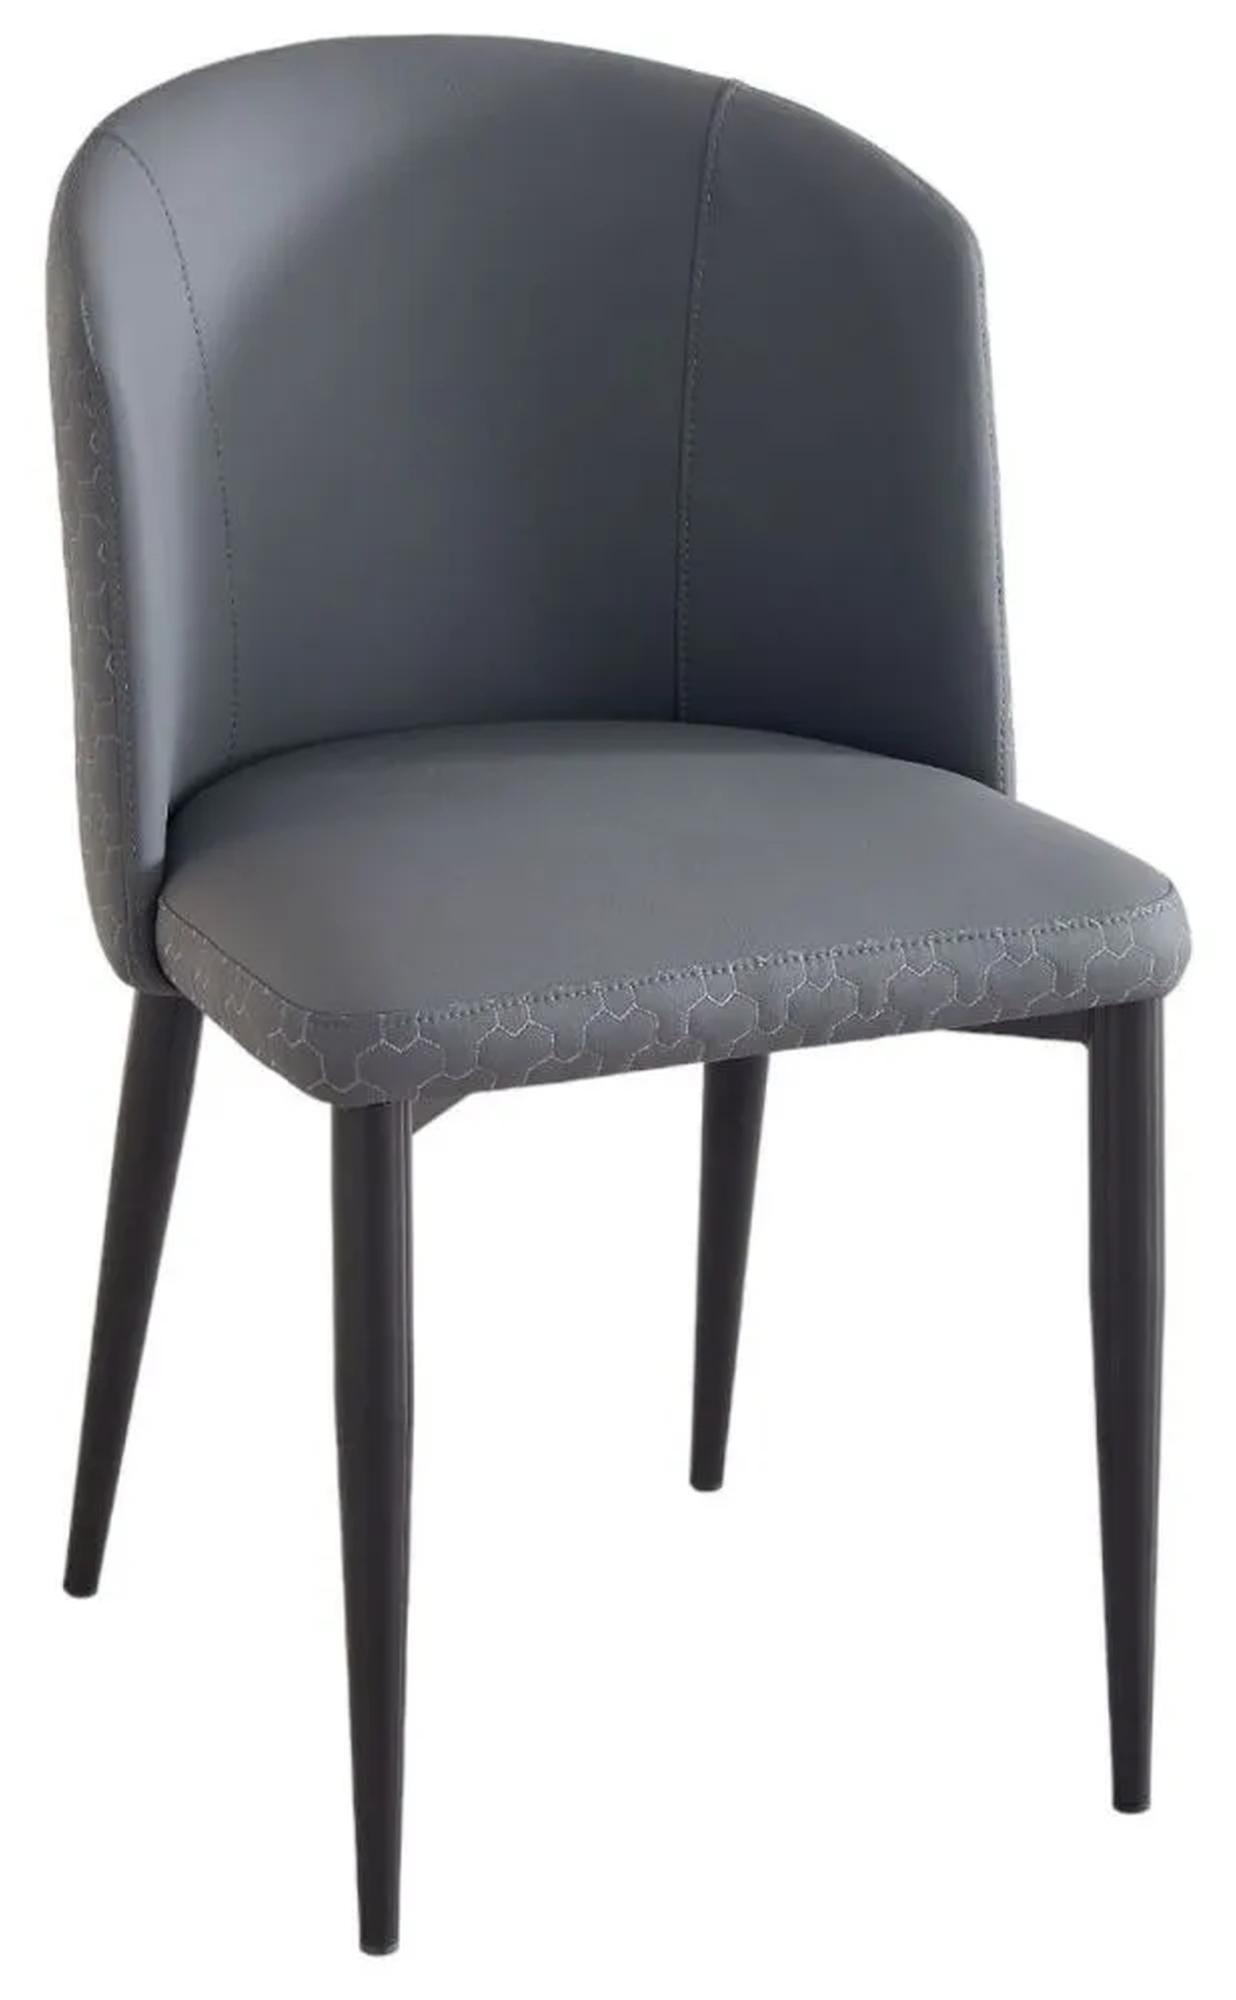 Deco Dark Grey Faux Leather High Back Dining Chair with Black Legs